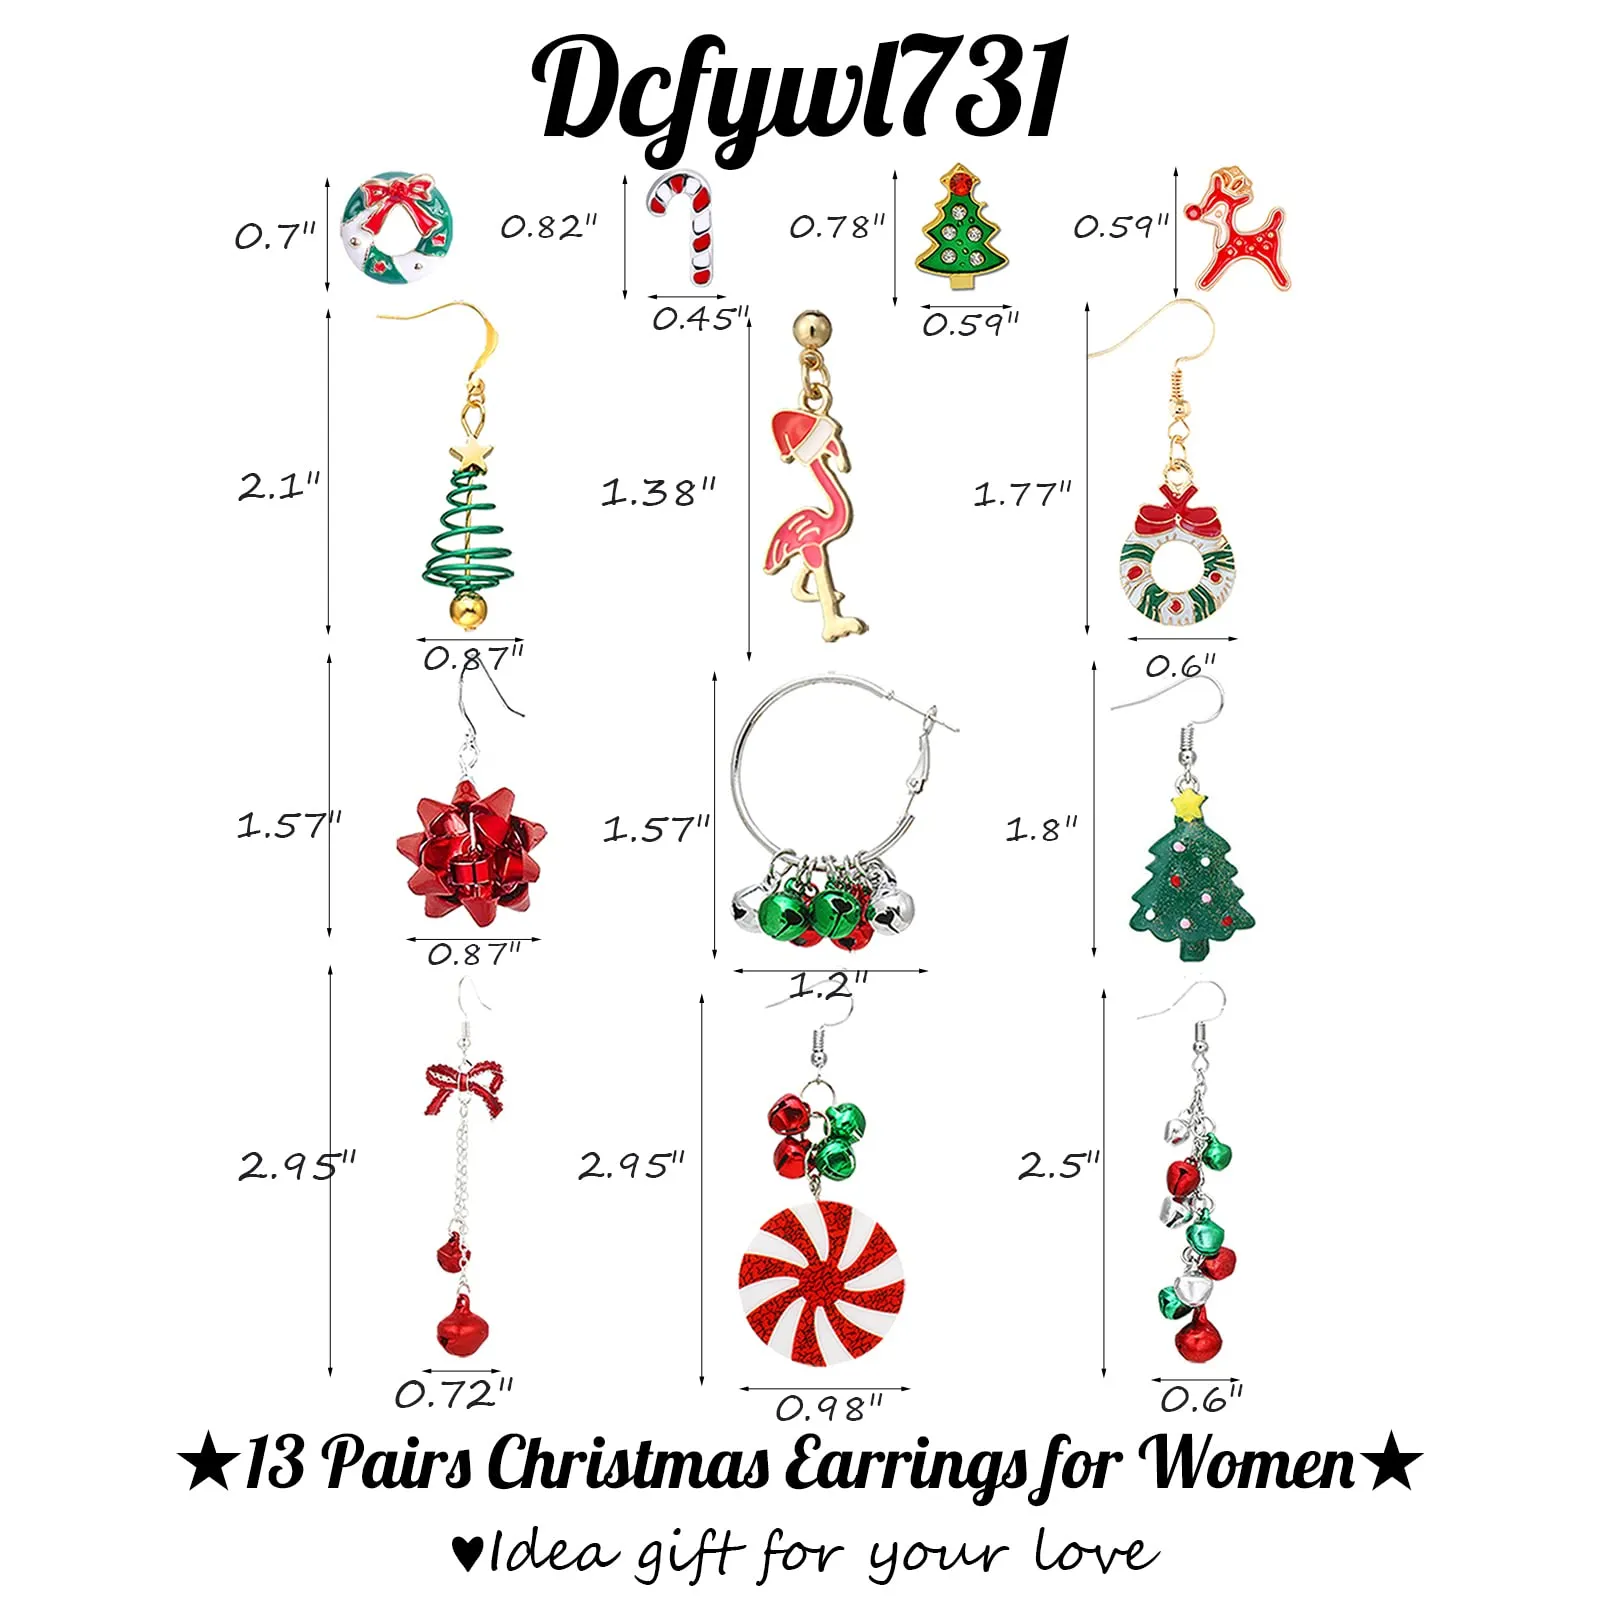 3ml 6/7/9/13/ christmas earrings for women holiday earrings bow knot snowflake jingle bell reindeer chrismtas earrings for girl cute xmas party gifts